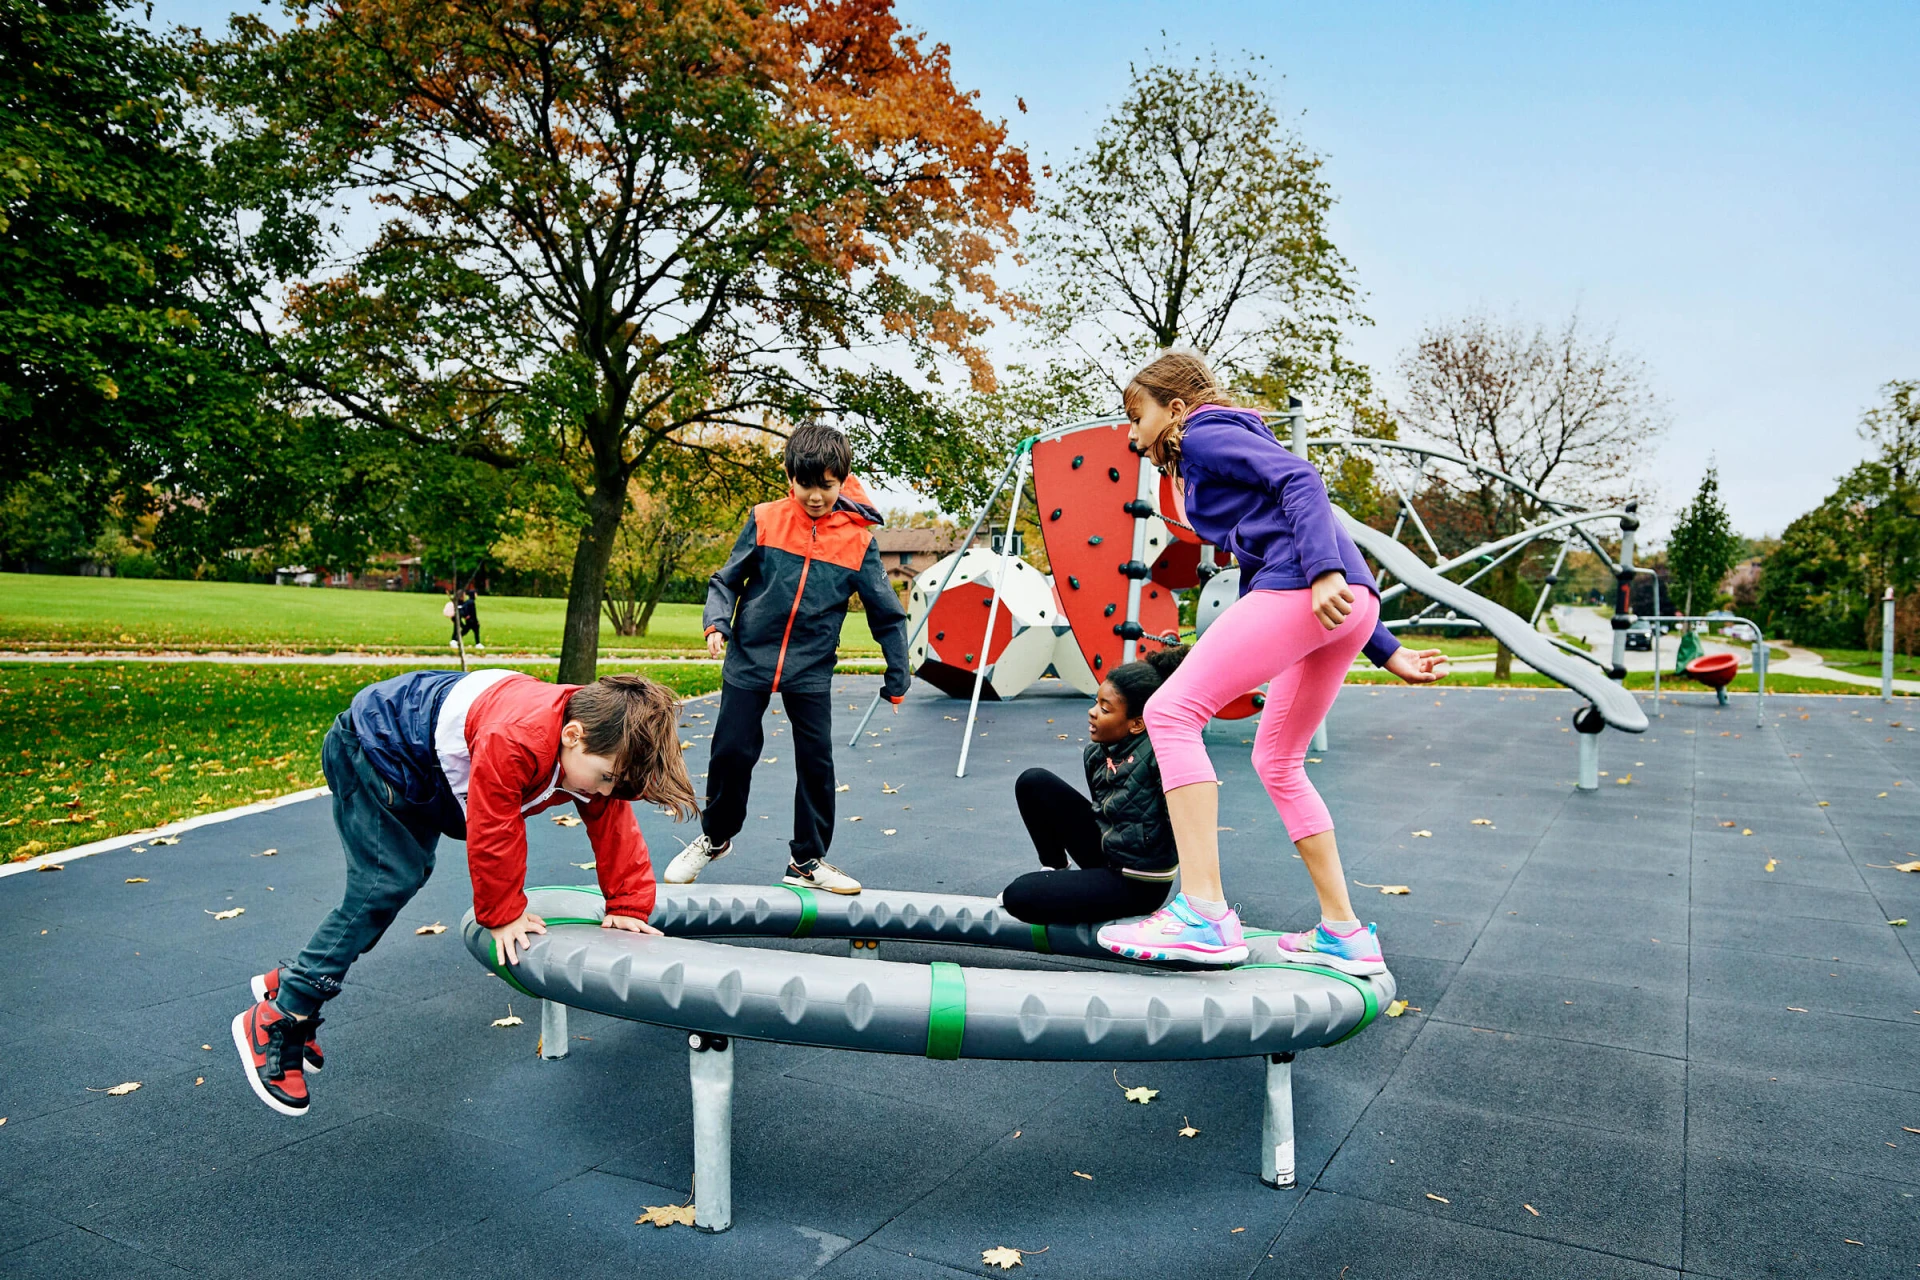 Children in Morgan Boyle Park playing on a supernova spinning playground equipment